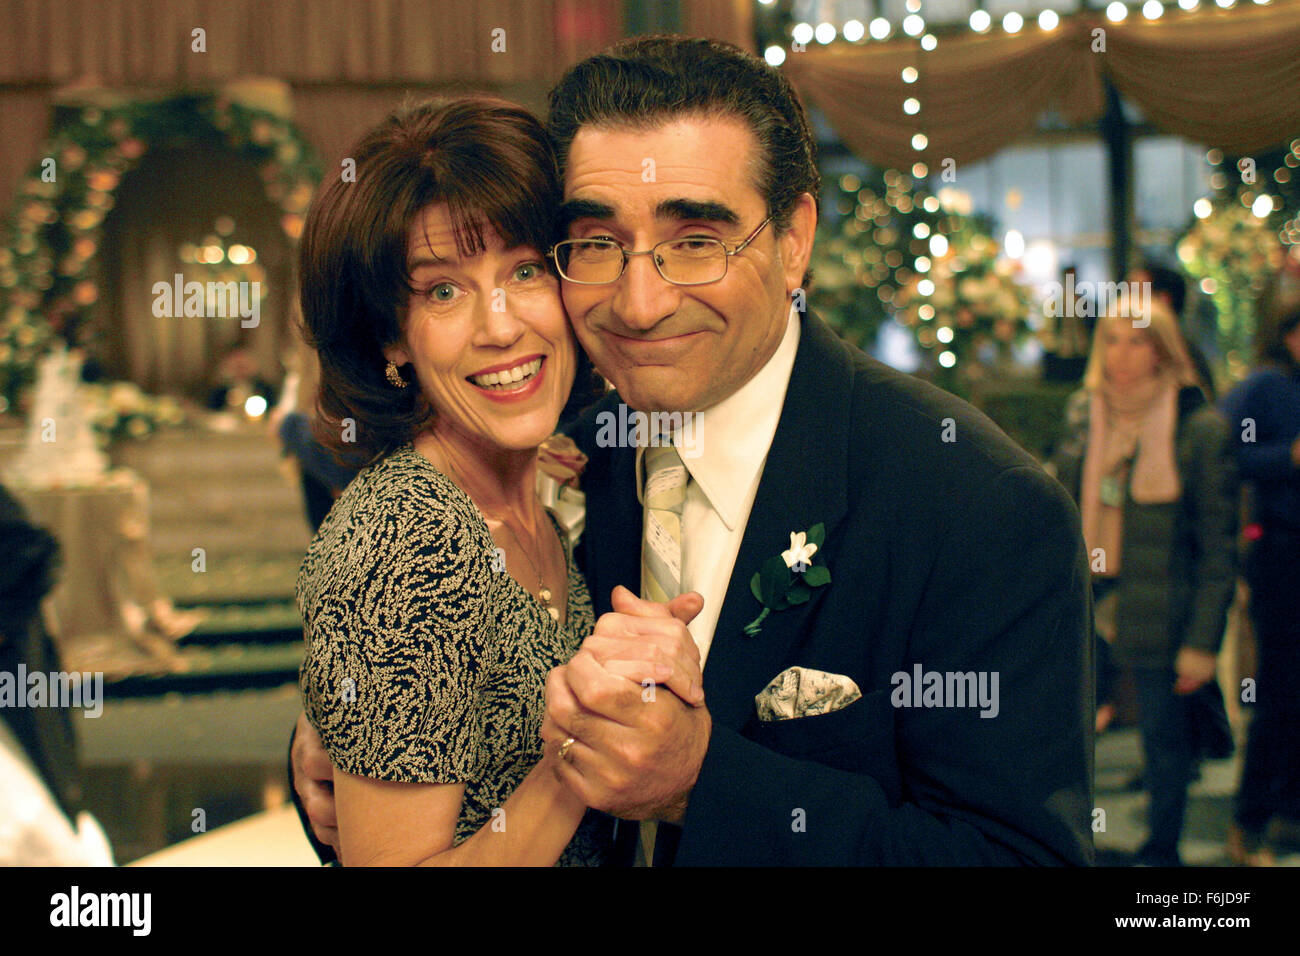 RELEASE DATE: July 24, 2003. MOVIE TITLE: American Wedding. STUDIO: Universal Studios. PLOT: The third film in the American Pie series deals with the wedding of Jim and Michelle and the gathering of their families and friends, including Jim's old friends from high school and Michelle's little sister. PICTURED:  MOLLY CHEEK as Jim's Mom and EUGENE LEVY as Jim's Dad. Stock Photo